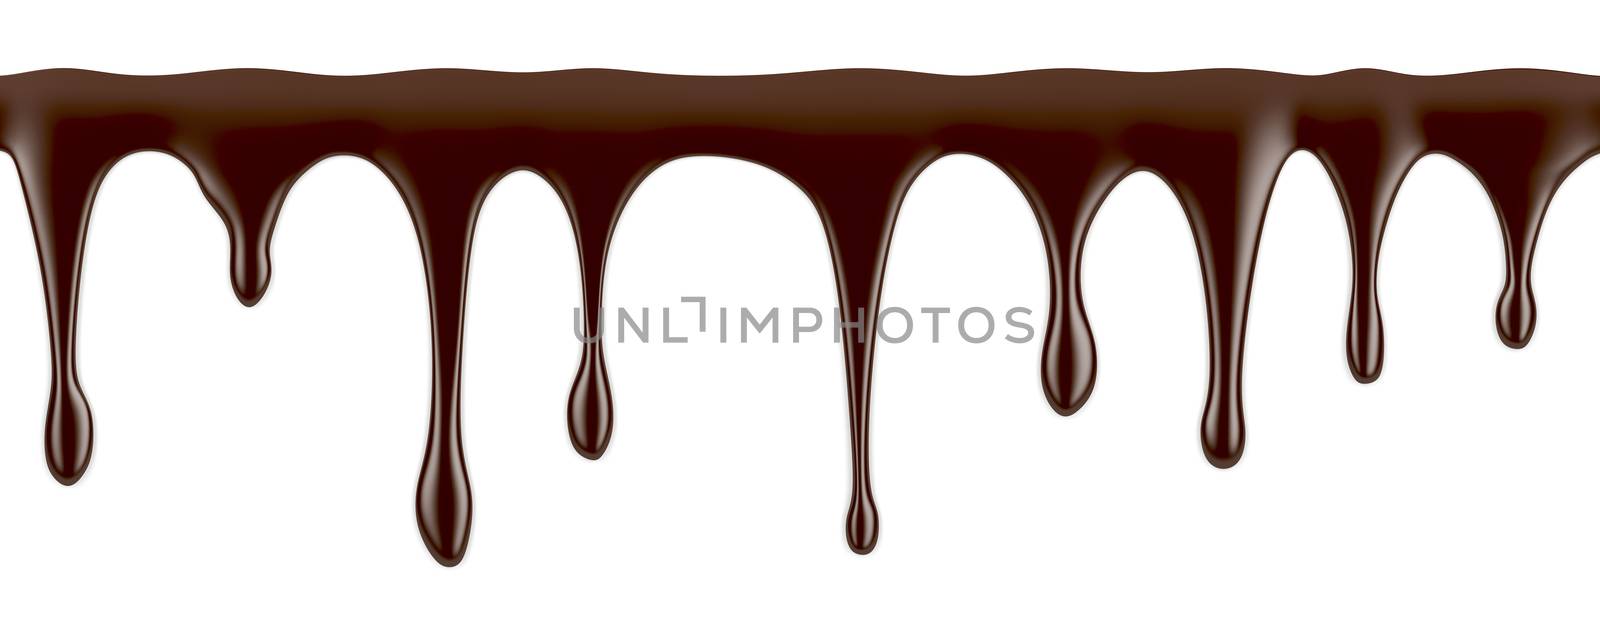 Melted chocolate by magraphics